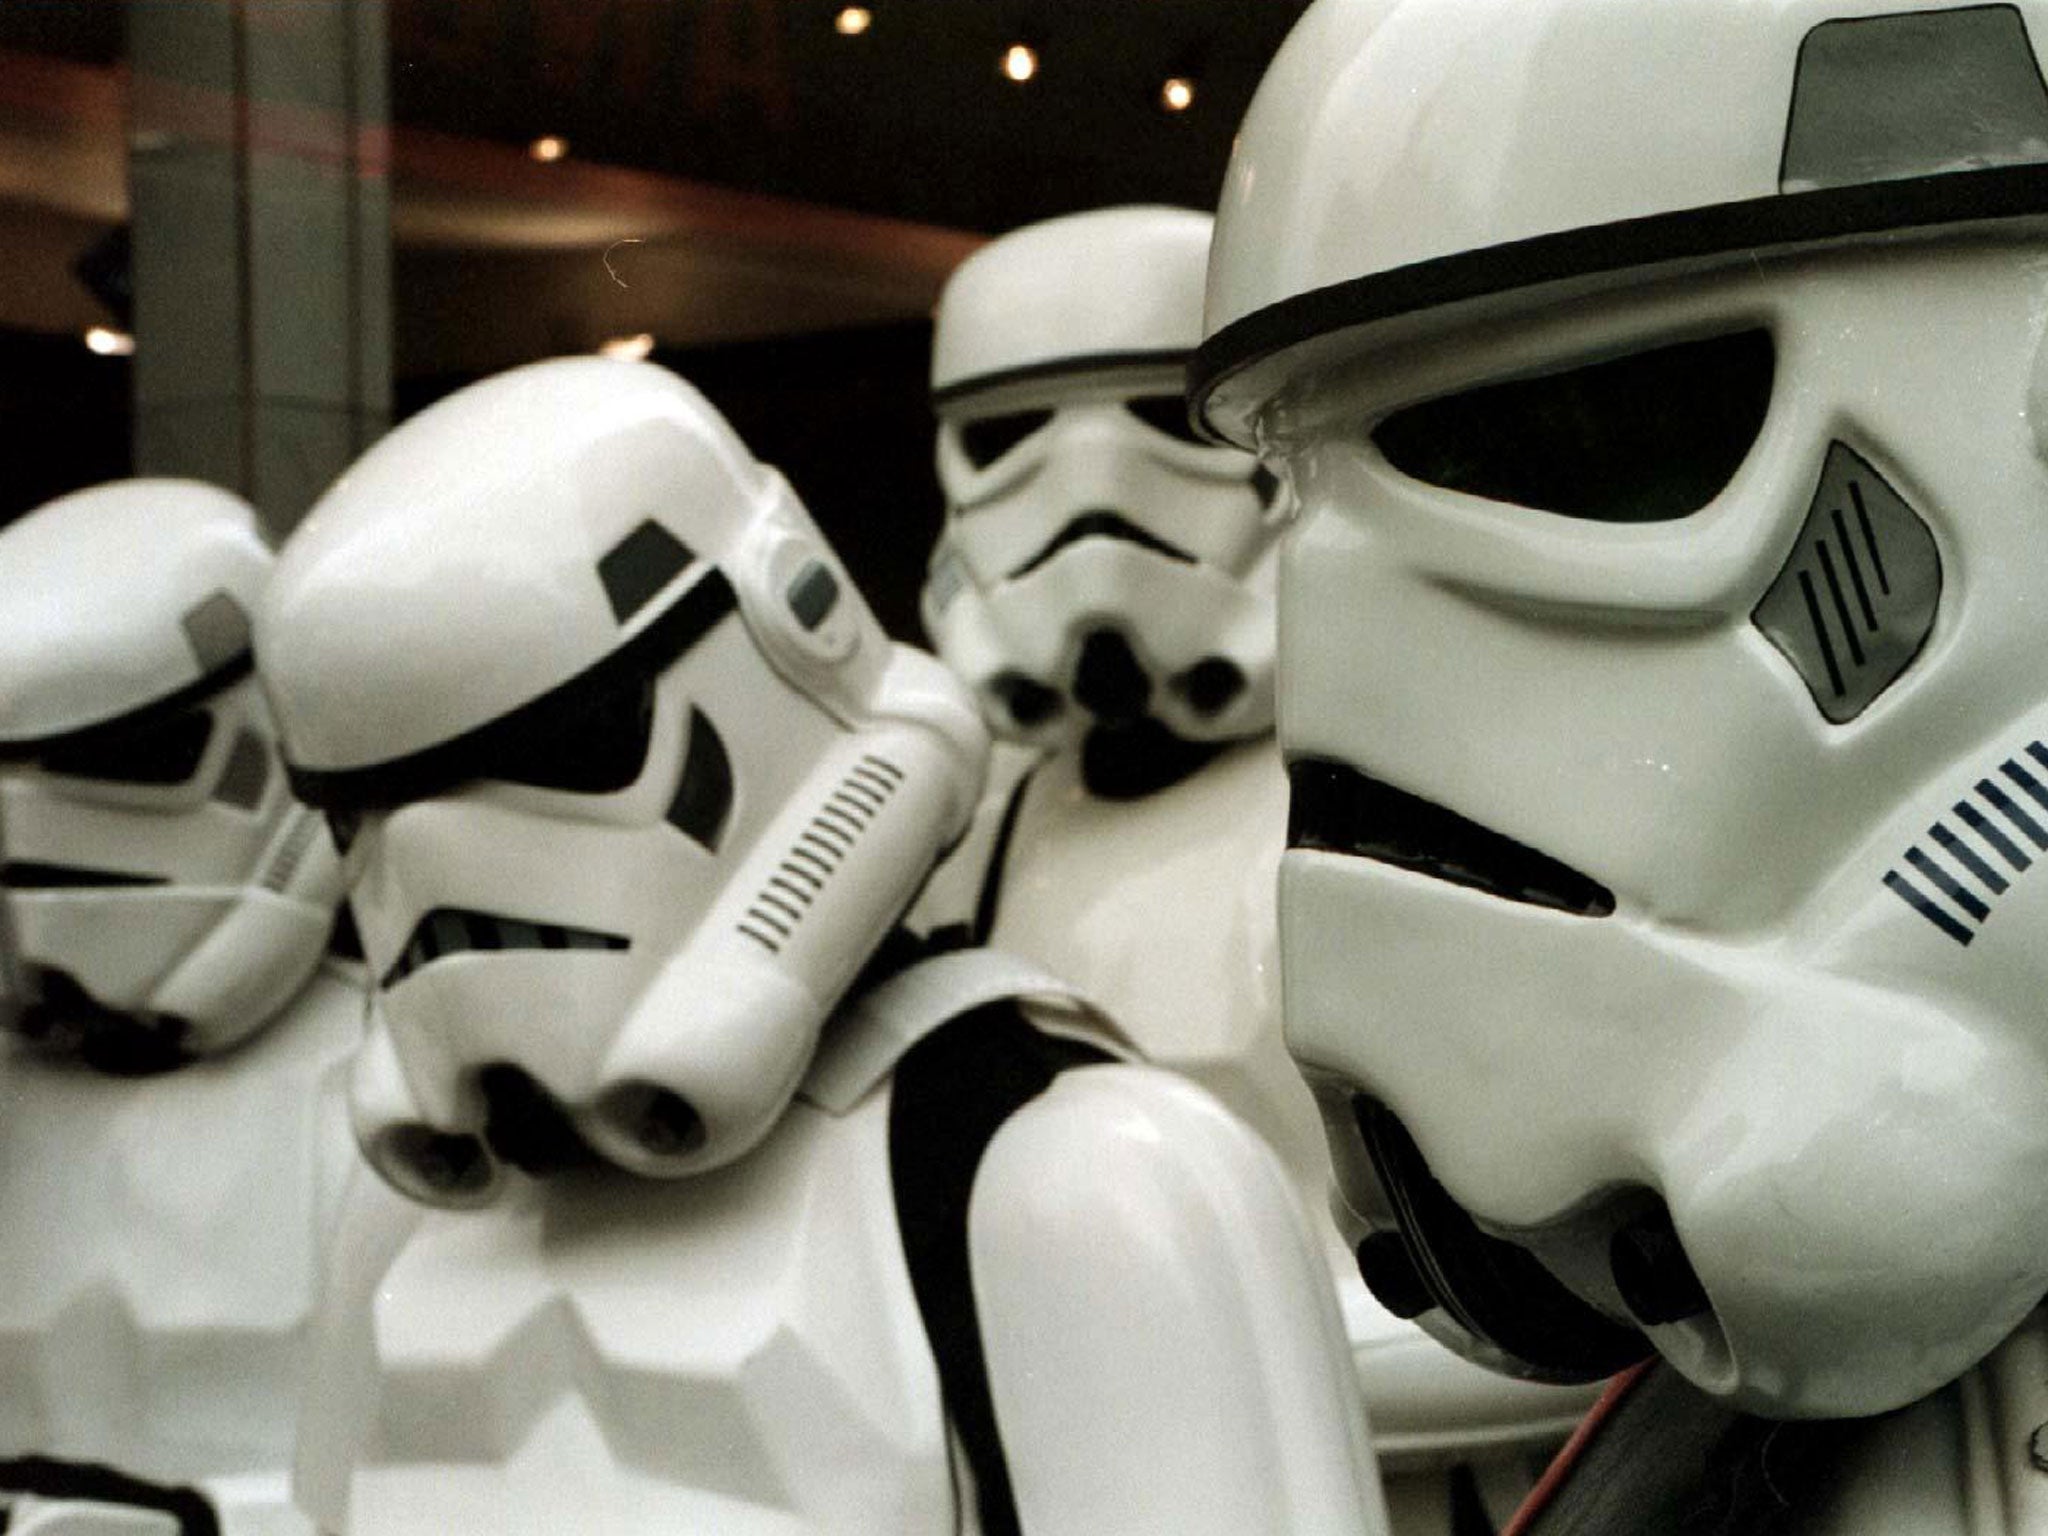 Star Wars stormtroopers are likely to be disappointed by the news